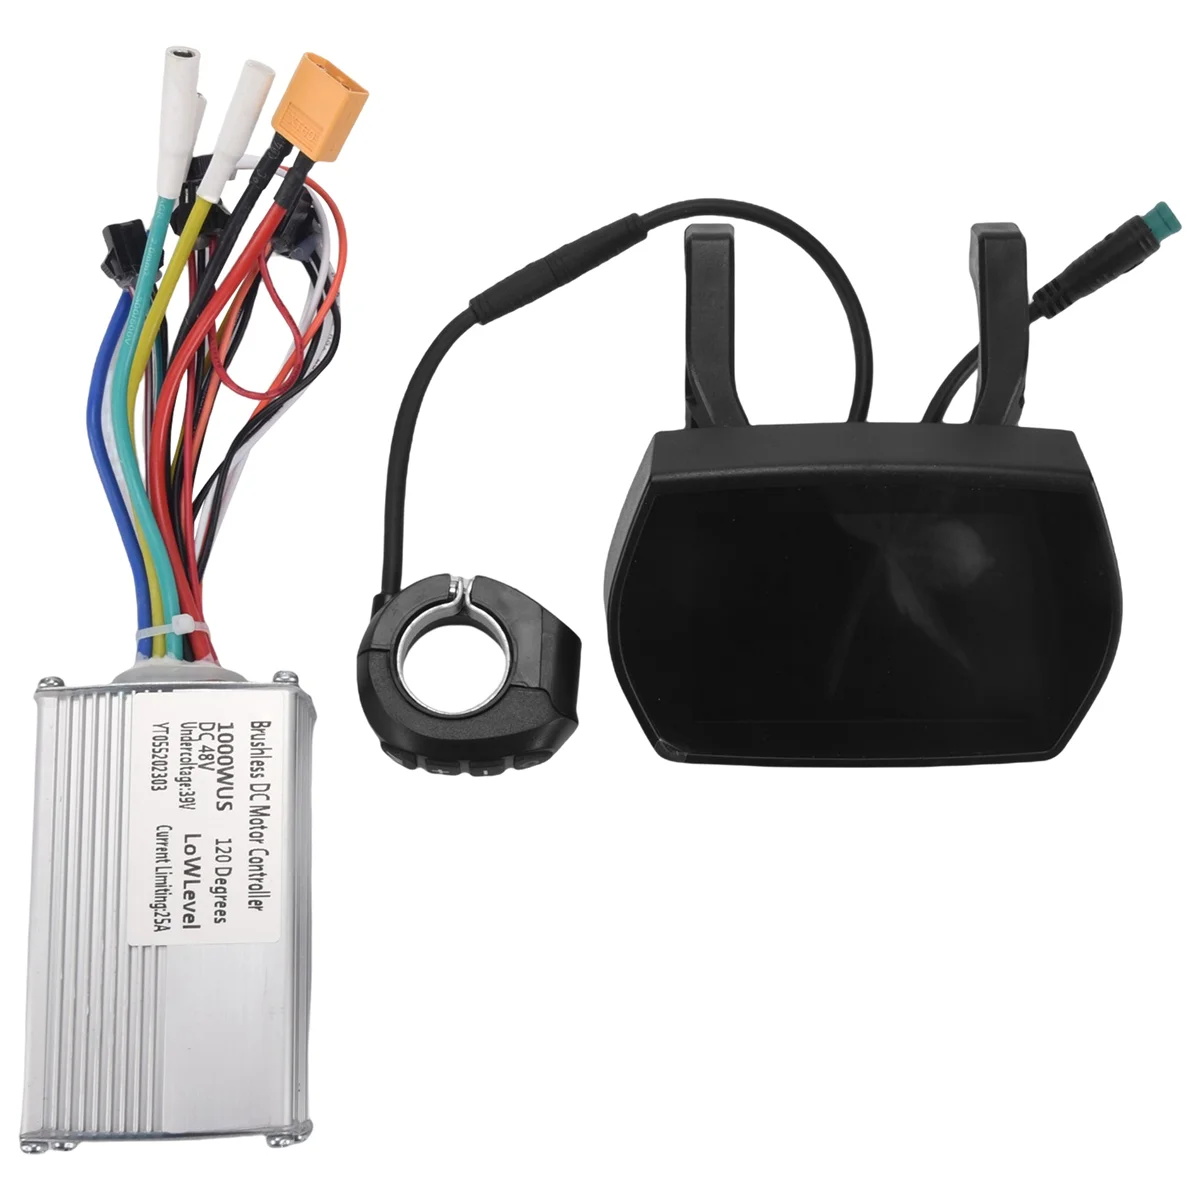 

48V 25A 1000W Electric Scooter Controller Kit with Display Scooter Dashboard for KUGOO G2 Pro Electric Scooter Parts